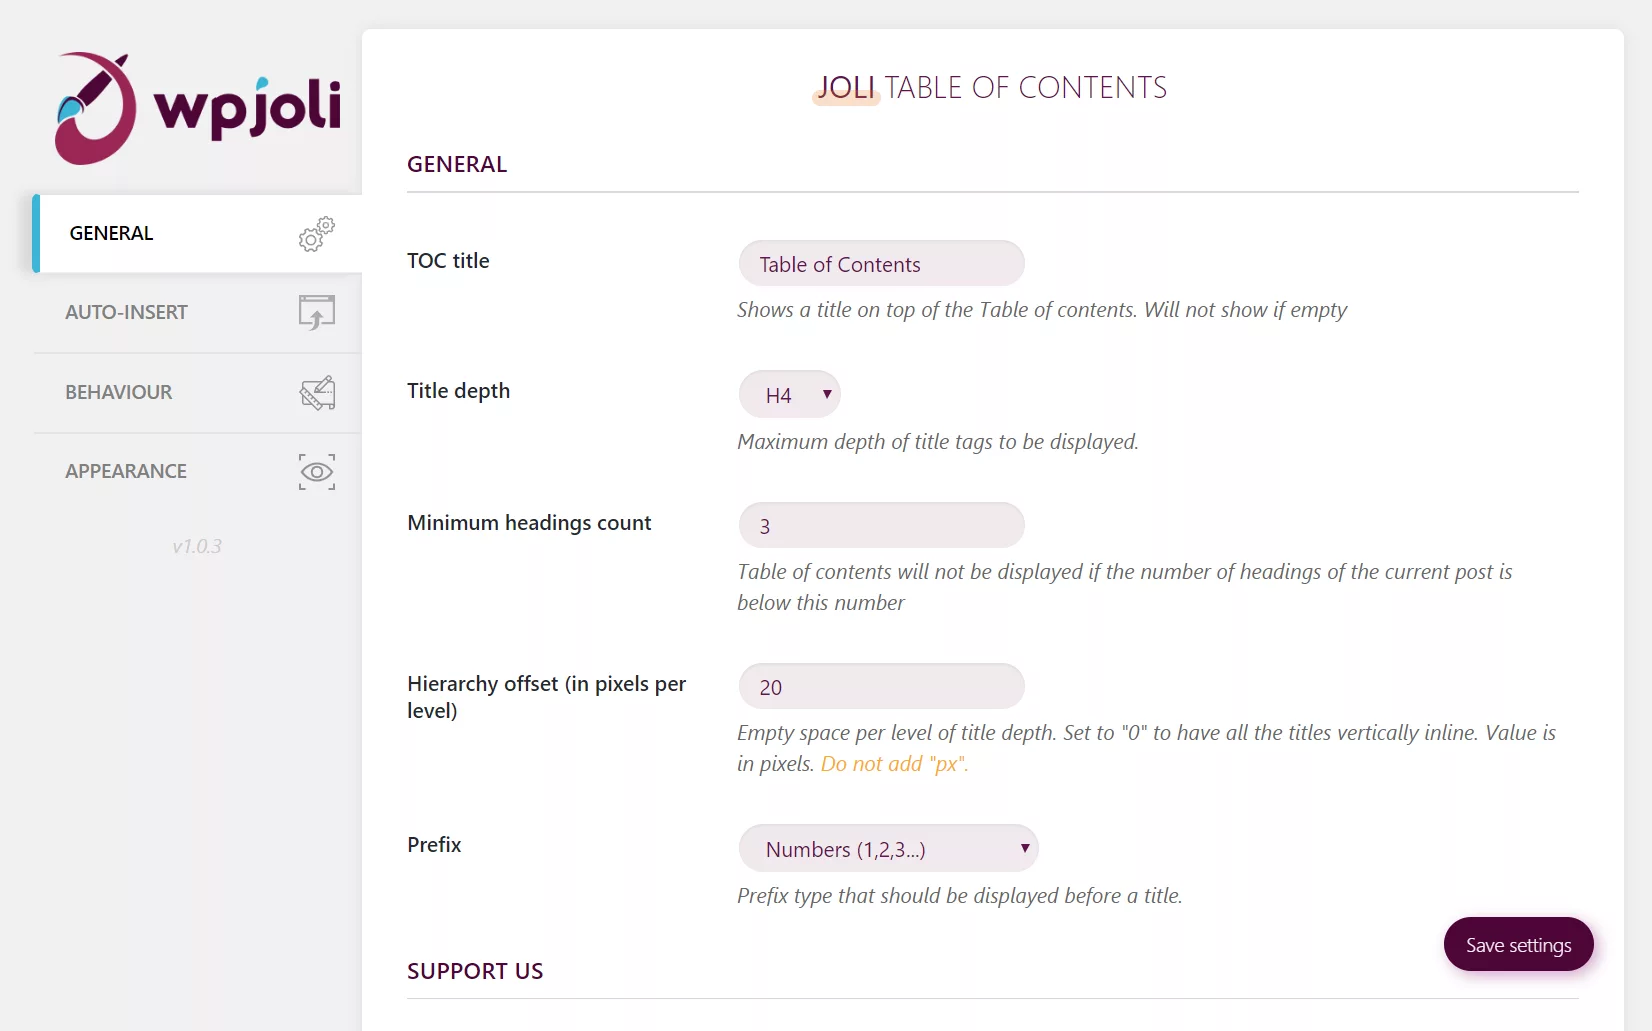 How To Use Joli Table of Contents?